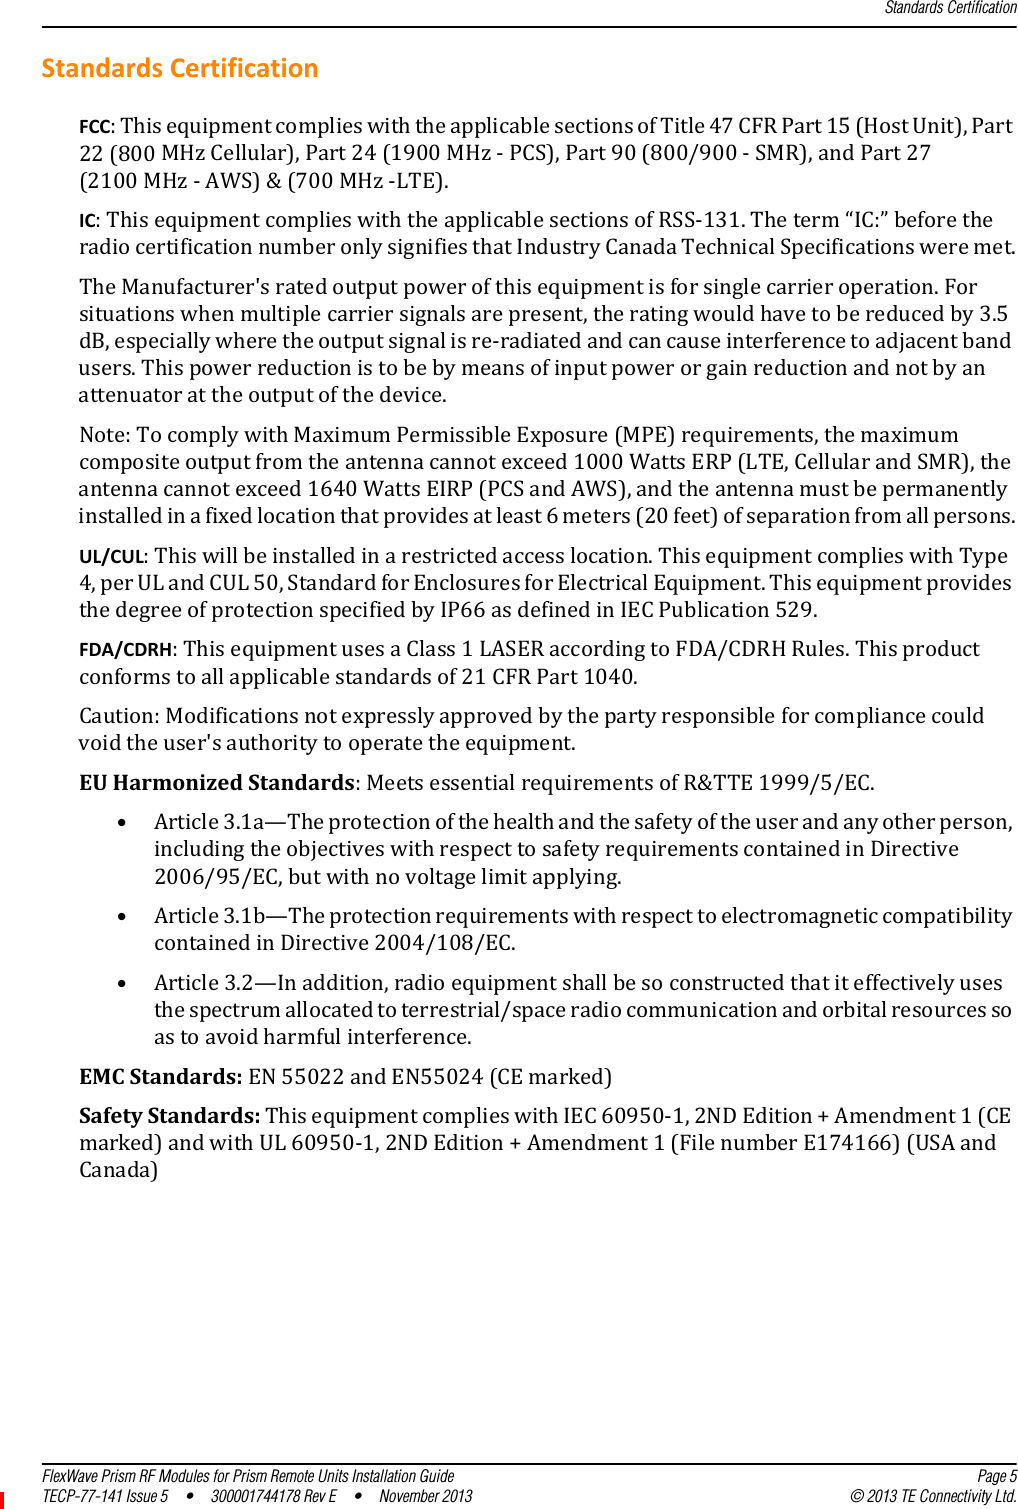 Standards CertificationFlexWave Prism RF Modules for Prism Remote Units Installation Guide Page 5TECP-77-141 Issue 5  •  300001744178 Rev E  •  November 2013 © 2013 TE Connectivity Ltd.StandardsCertificationFCC:ThisequipmentcomplieswiththeapplicablesectionsofTitle47CFRPart15(HostUnit),Part22(800MHzCellular),Part24(1900MHz‐PCS),Part90(800/900‐SMR),andPart27(2100MHz‐AWS)&amp;(700MHz‐LTE).IC:ThisequipmentcomplieswiththeapplicablesectionsofRSS‐131.Theterm“IC:”beforetheradiocertificationnumberonlysignifiesthatIndustryCanadaTechnicalSpecificationsweremet.TheManufacturer&apos;sratedoutputpowerofthisequipmentisforsinglecarrieroperation.Forsituationswhenmultiplecarriersignalsarepresent,theratingwouldhavetobereducedby3.5dB,especiallywheretheoutputsignalisre‐radiatedandcancauseinterferencetoadjacentbandusers.Thispowerreductionistobebymeansofinputpowerorgainreductionandnotbyanattenuatorattheoutputofthedevice.Note:TocomplywithMaximumPermissibleExposure(MPE)requirements,themaximumcompositeoutputfromtheantennacannotexceed1000WattsERP(LTE,CellularandSMR),theantennacannotexceed1640WattsEIRP(PCSandAWS),andtheantennamustbepermanentlyinstalledinafixedlocationthatprovidesatleast6meters(20feet)ofseparationfromallpersons.UL/CUL:Thiswillbeinstalledinarestrictedaccesslocation.ThisequipmentcomplieswithType4,perULandCUL50,StandardforEnclosuresforElectricalEquipment.ThisequipmentprovidesthedegreeofprotectionspecifiedbyIP66asdefinedinIECPublication529.FDA/CDRH:ThisequipmentusesaClass1LASERaccordingtoFDA/CDRHRules.Thisproductconformstoallapplicablestandardsof21CFRPart1040.Caution:Modificationsnotexpresslyapprovedbythepartyresponsibleforcompliancecouldvoidtheuser&apos;sauthoritytooperatetheequipment.EUHarmonizedStandards:MeetsessentialrequirementsofR&amp;TTE1999/5/EC.•Article3.1a—Theprotectionofthehealthandthesafetyoftheuserandanyotherperson,includingtheobjectiveswithrespecttosafetyrequirementscontainedinDirective2006/95/EC,butwithnovoltagelimitapplying.•Article3.1b—TheprotectionrequirementswithrespecttoelectromagneticcompatibilitycontainedinDirective2004/108/EC.•Article3.2—Inaddition,radioequipmentshallbesoconstructedthatiteffectivelyusesthespectrumallocatedtoterrestrial/spaceradiocommunicationandorbitalresourcessoastoavoidharmfulinterference.EMCStandards:EN55022andEN55024(CEmarked)SafetyStandards:ThisequipmentcomplieswithIEC60950‐1,2NDEdition+Amendment1(CEmarked)andwithUL60950‐1,2NDEdition+Amendment1(FilenumberE174166)(USAandCanada)